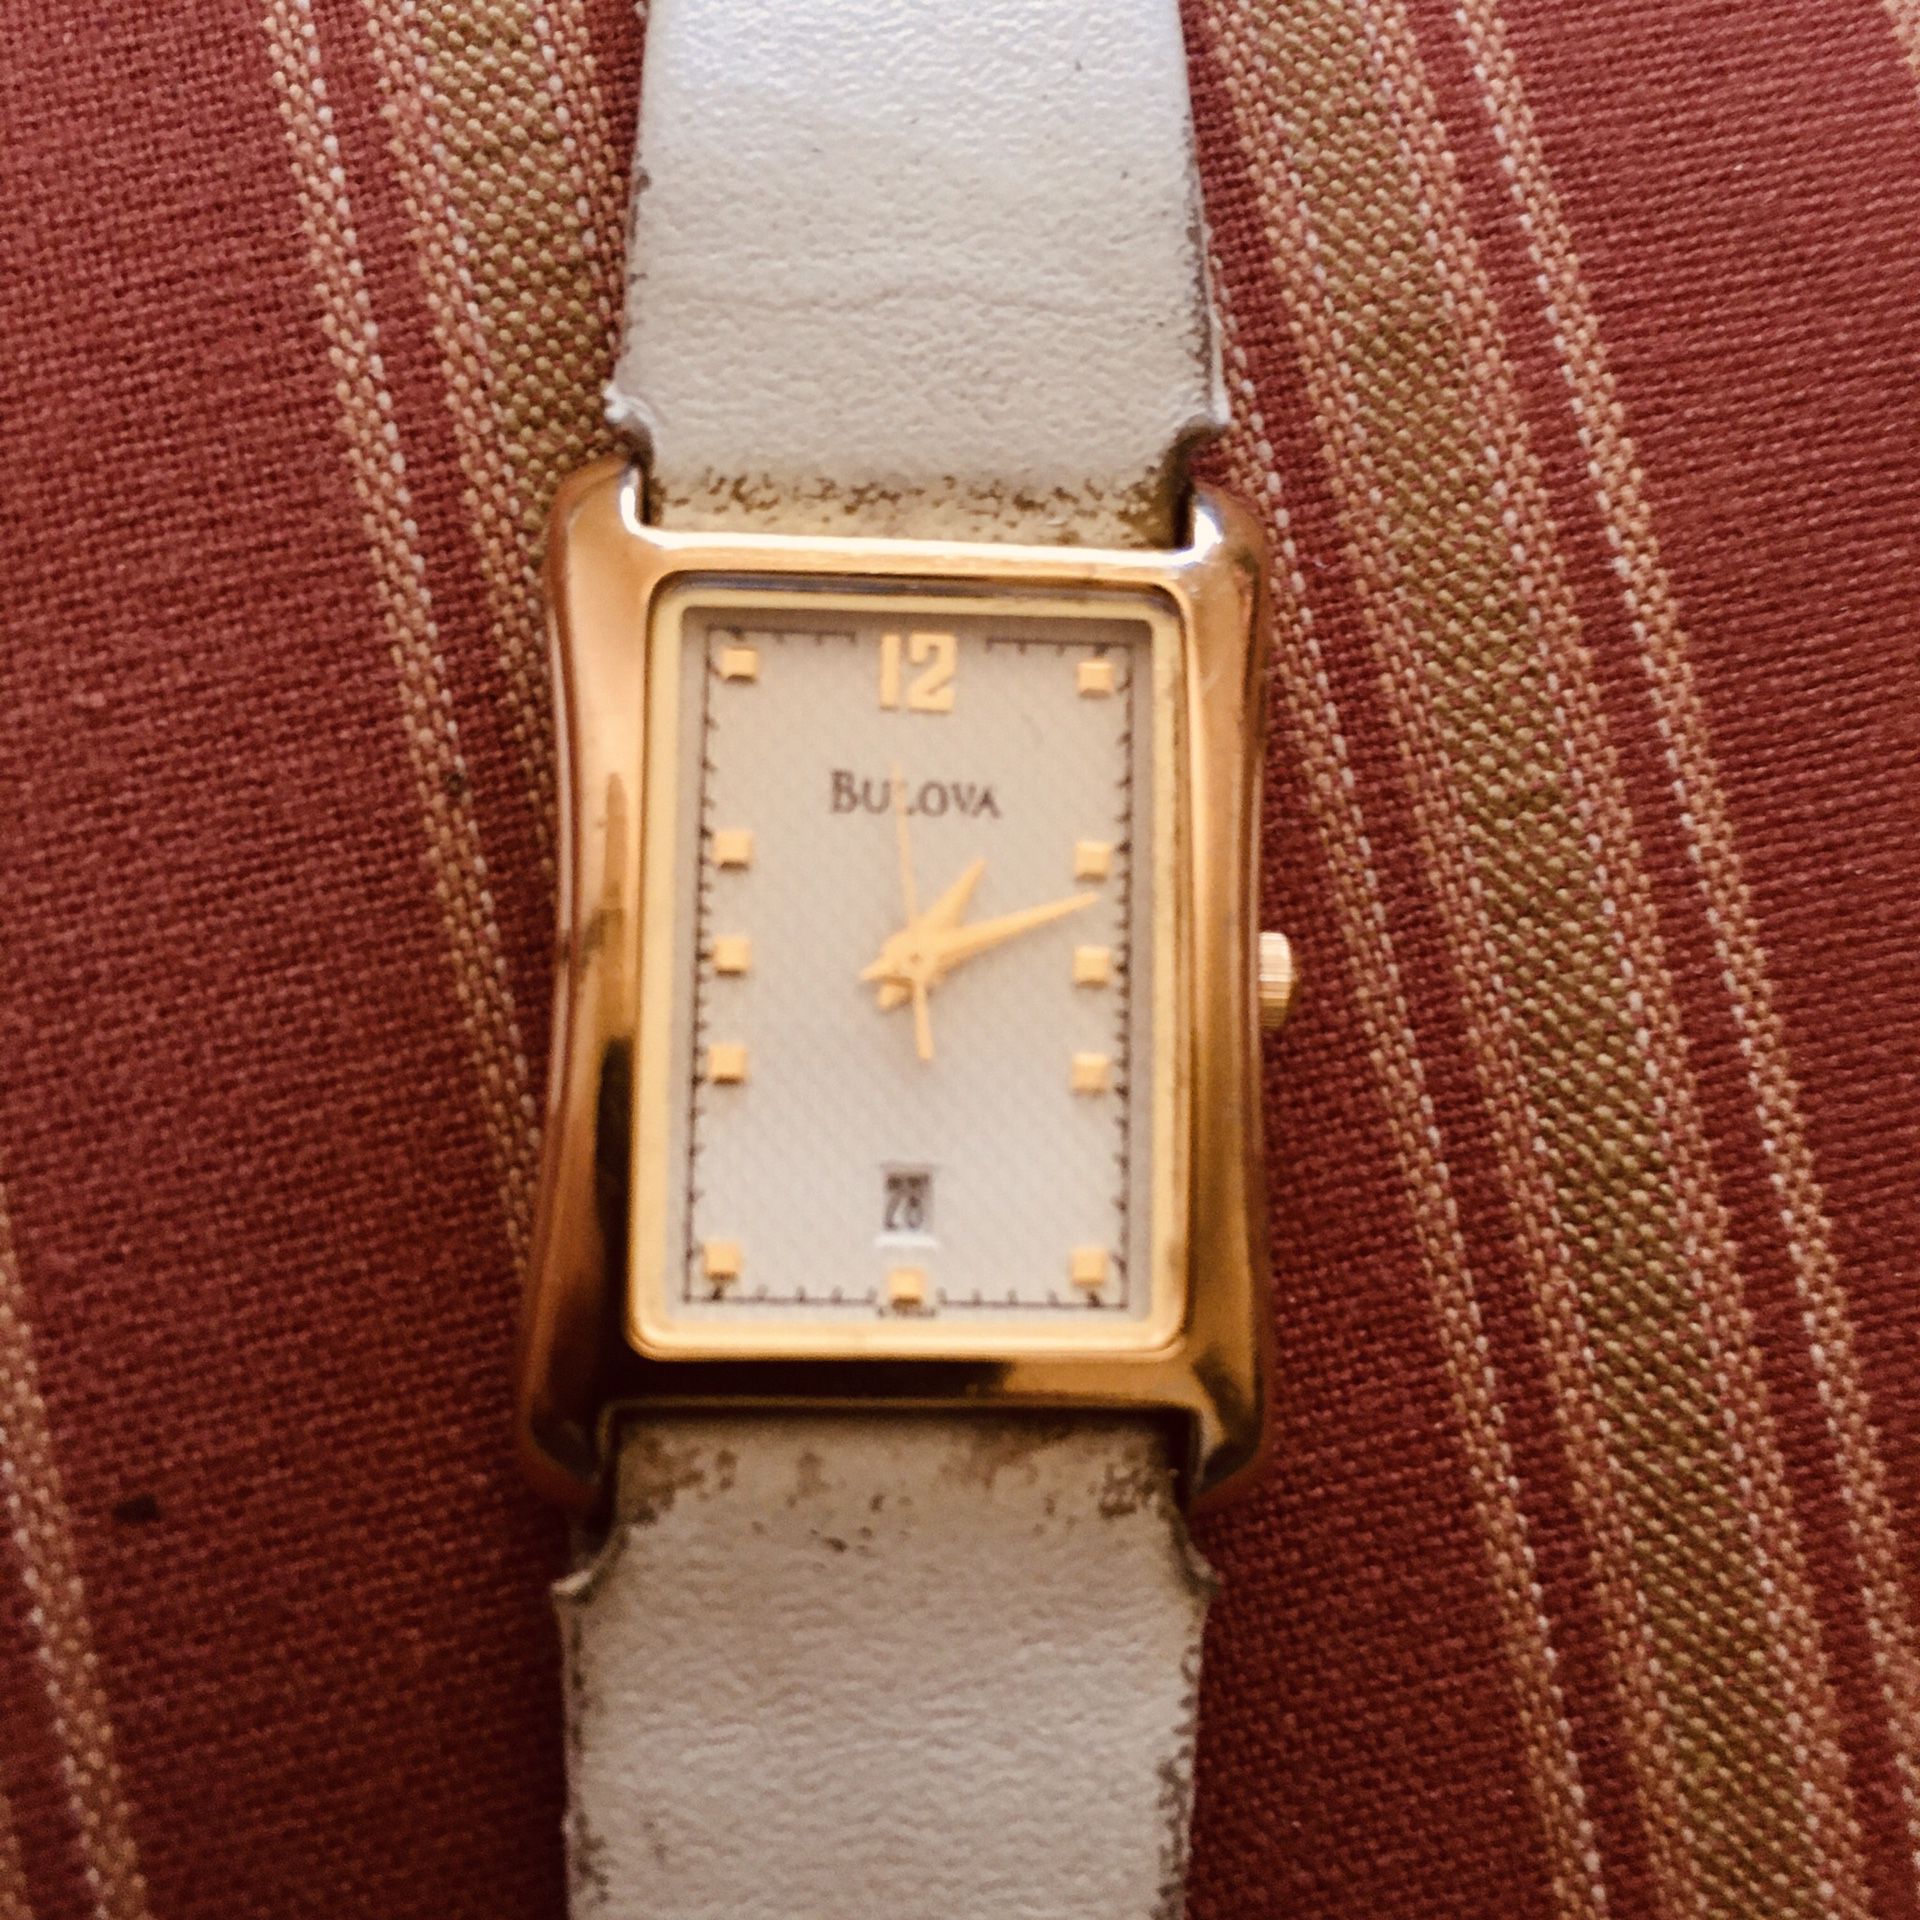 Vintage Bulova Women’s Classic Watch - Rectangular - Gold-Tone - Leather Strap - Date THAT WORKS LIKE A CHARM!